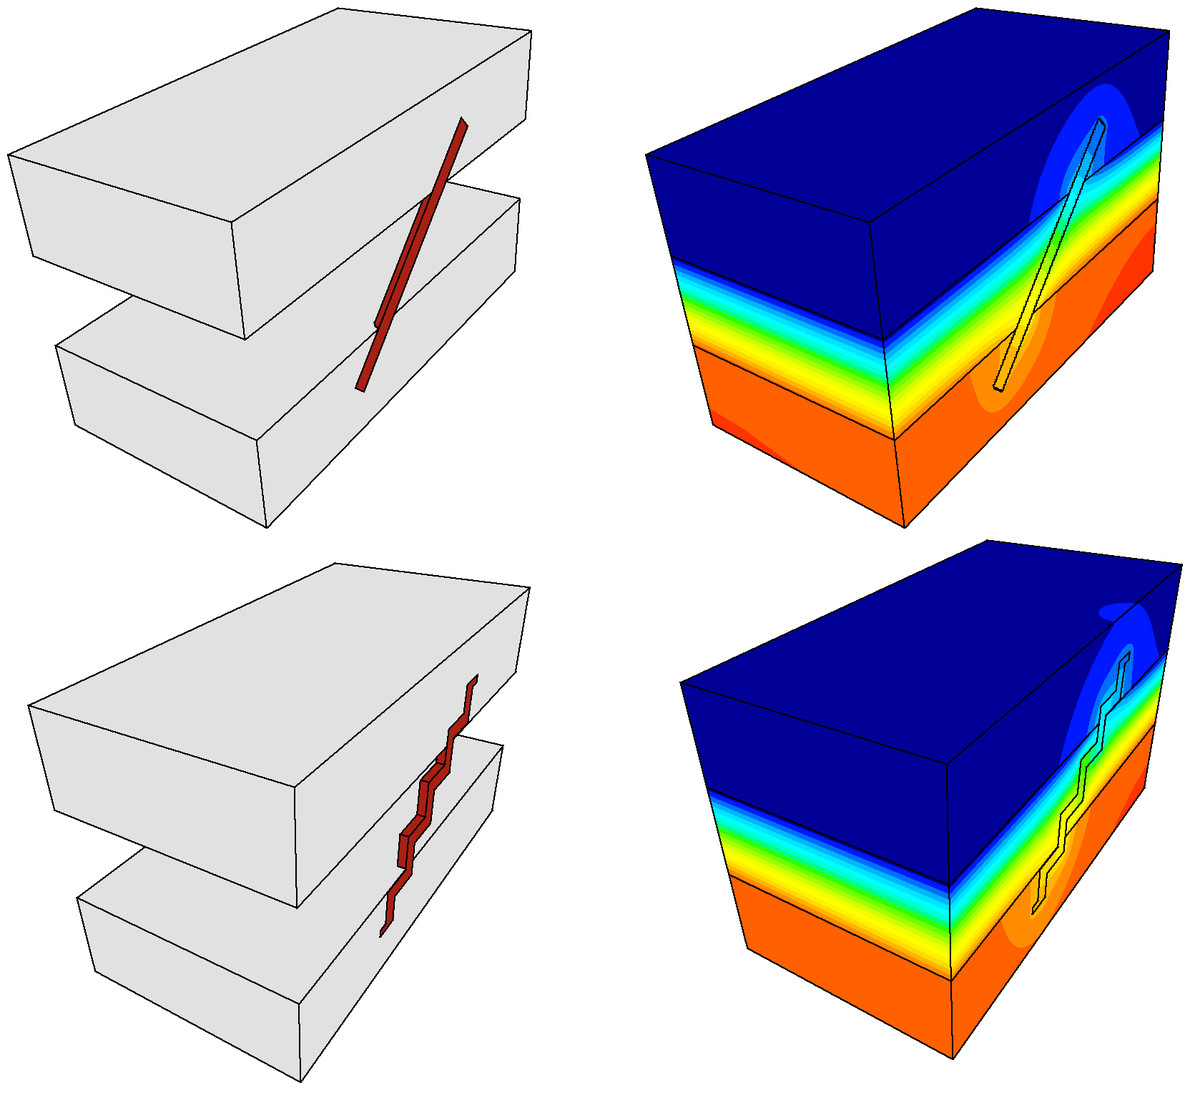 G1-Validation of simplifying the thermal simulation of an object with a 3D sloped metal bar